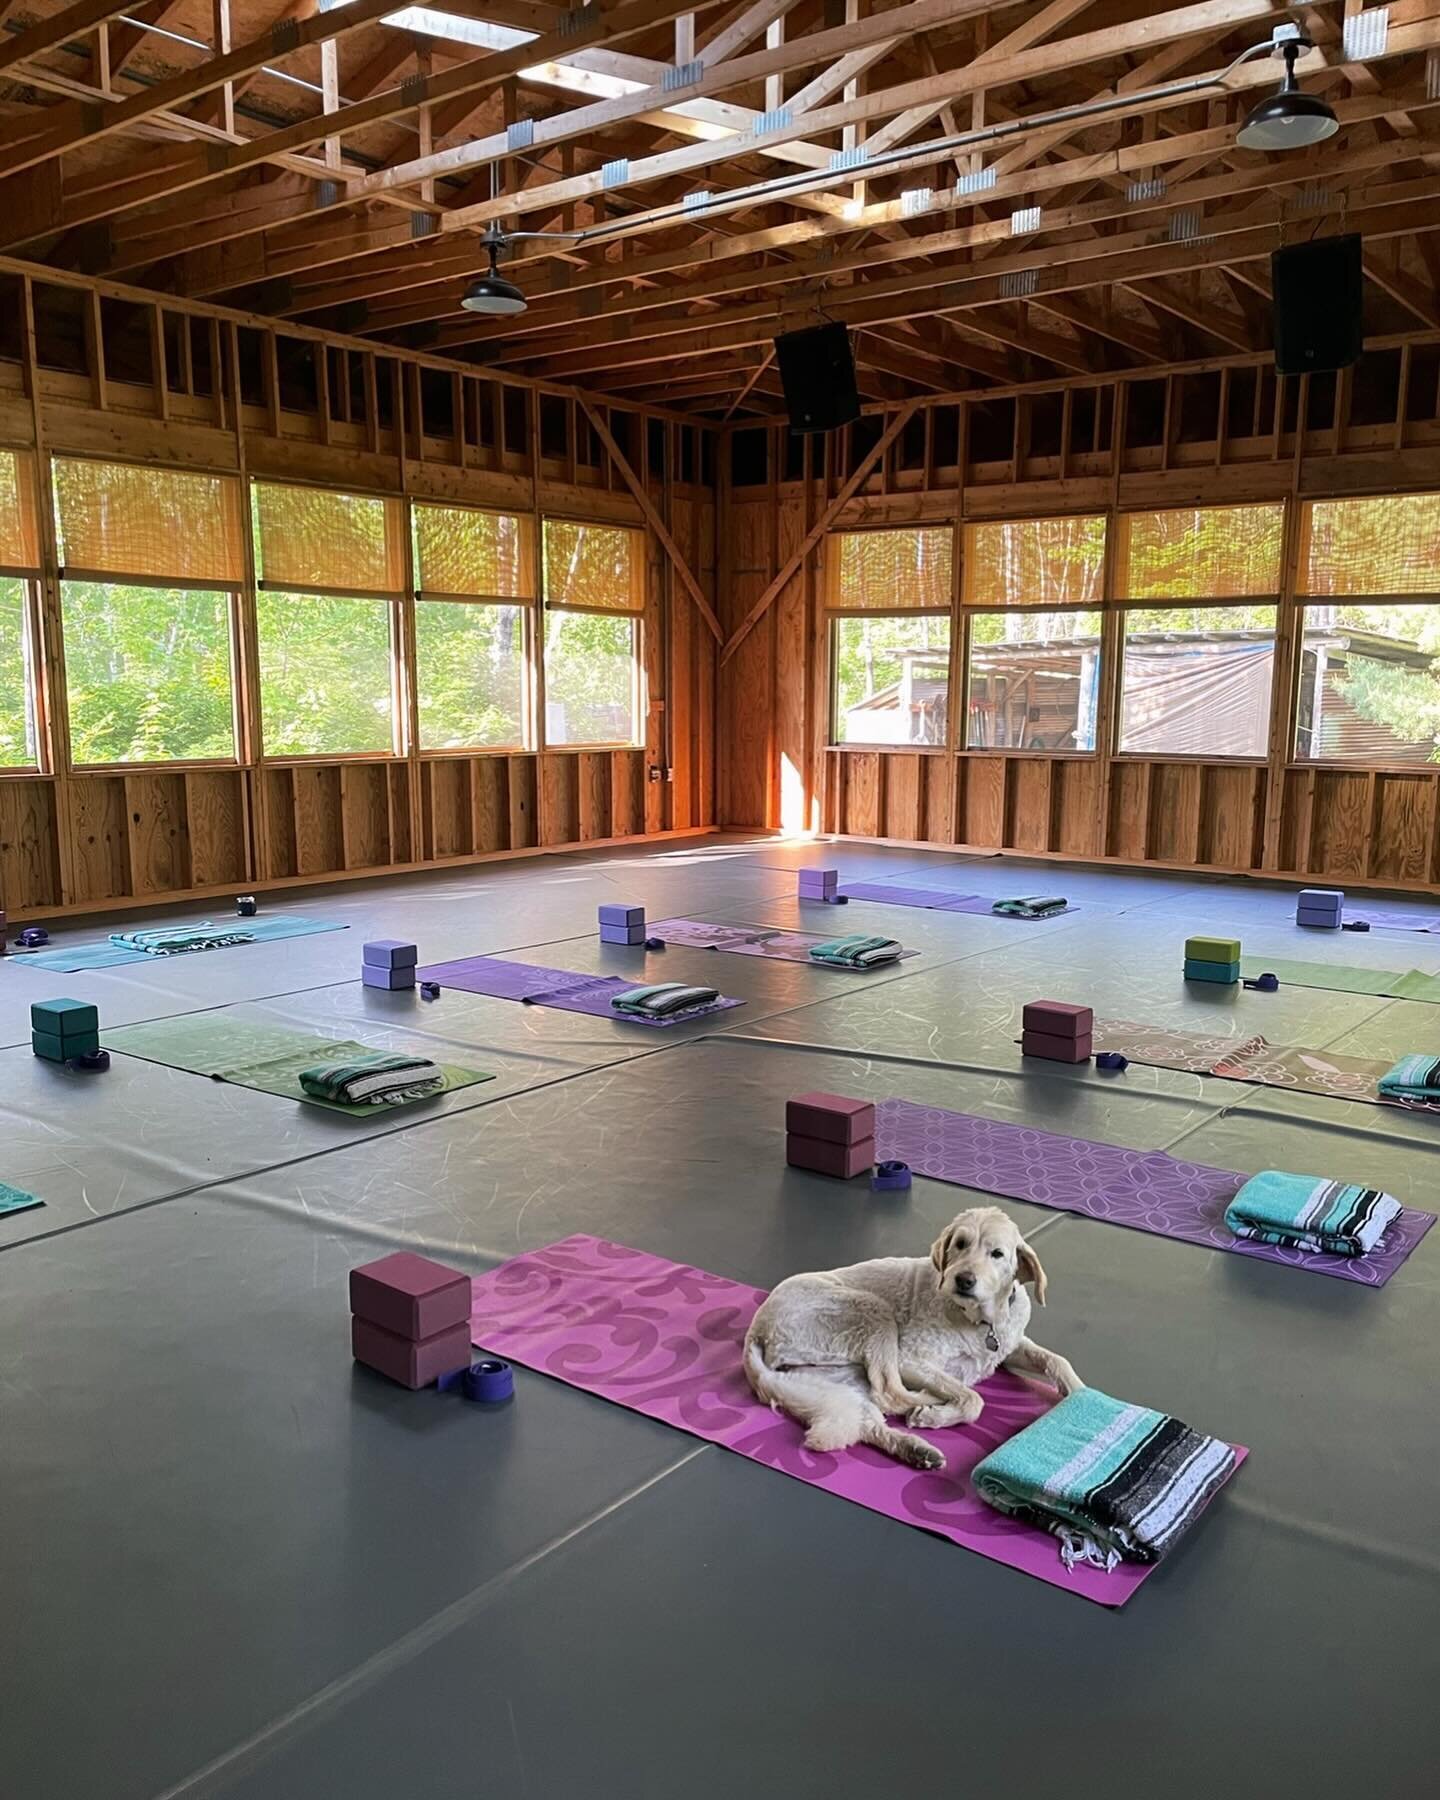 Yoga is coming back to the lake! And Jai can&rsquo;t wait to downward dog with you 🐾 

June through September, join us for weekly yoga classes in our bright and airy, Aerie!!

Stay tuned for more!! Details coming soon ✨

#elymn #toftelakecenter #yog